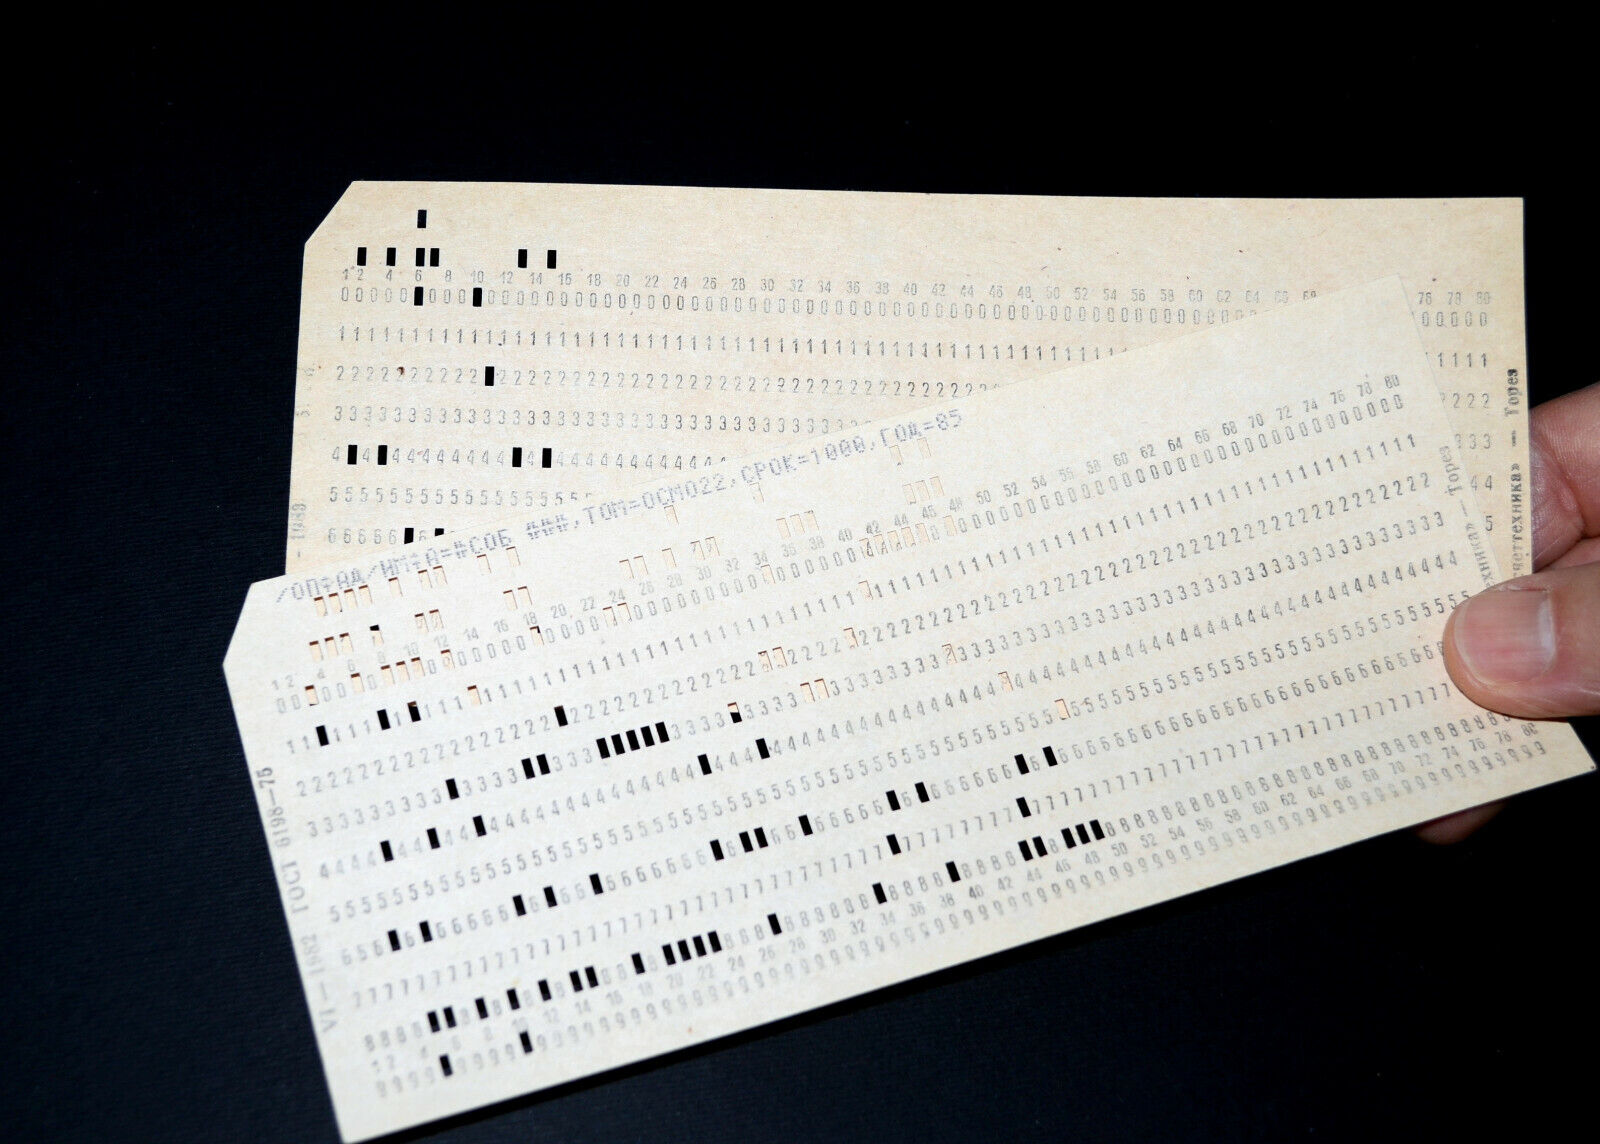 2x VINTAGE MAINFRAME COMPUTER Perforated PUNCH CARDS. IBM 80-column card format